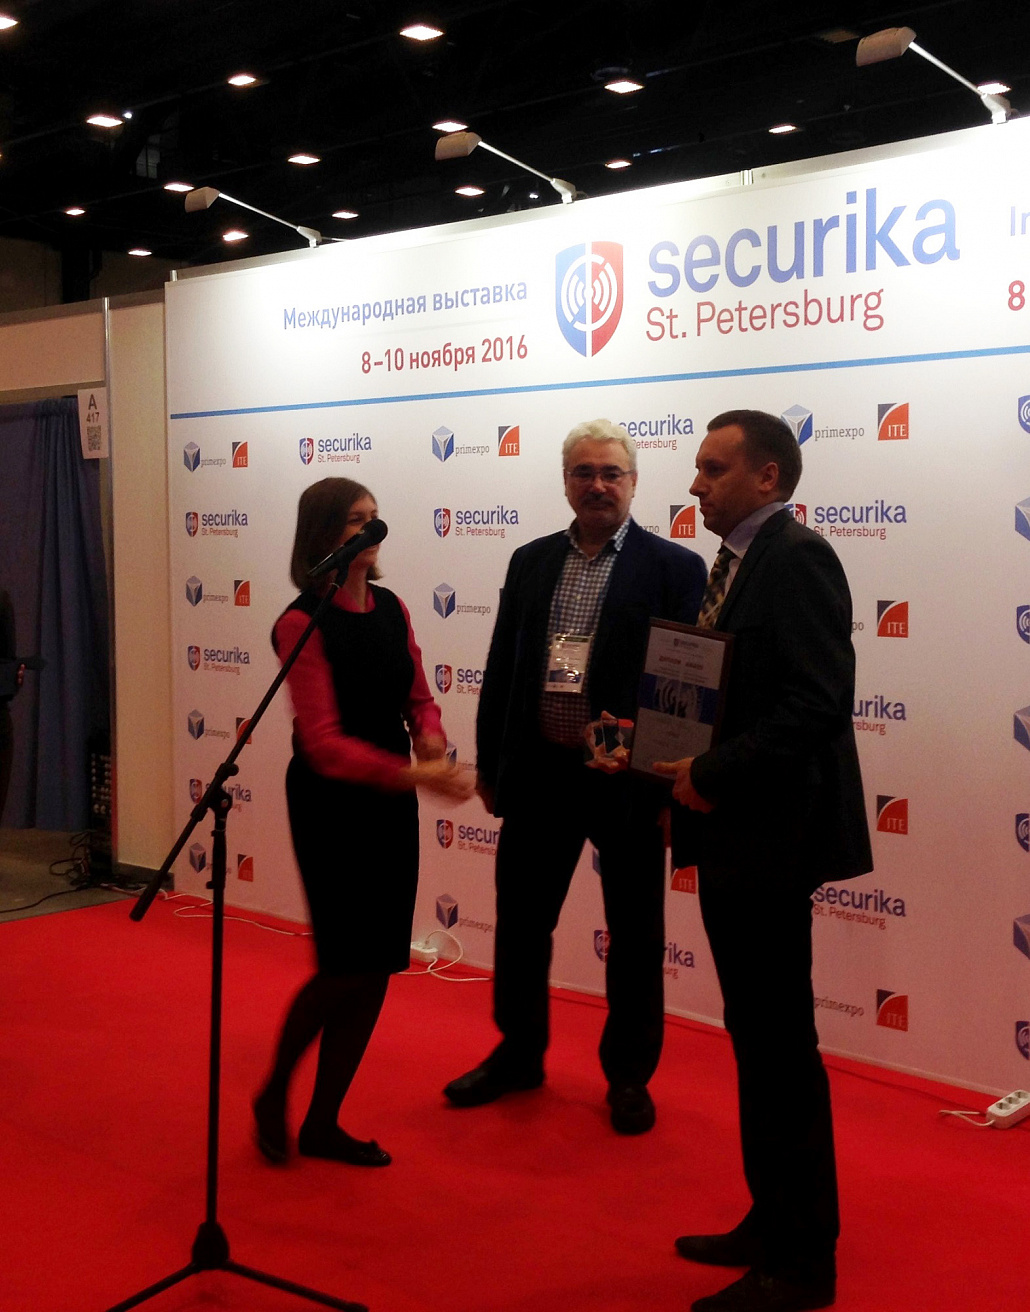 1-st prize in competition "Security standard"